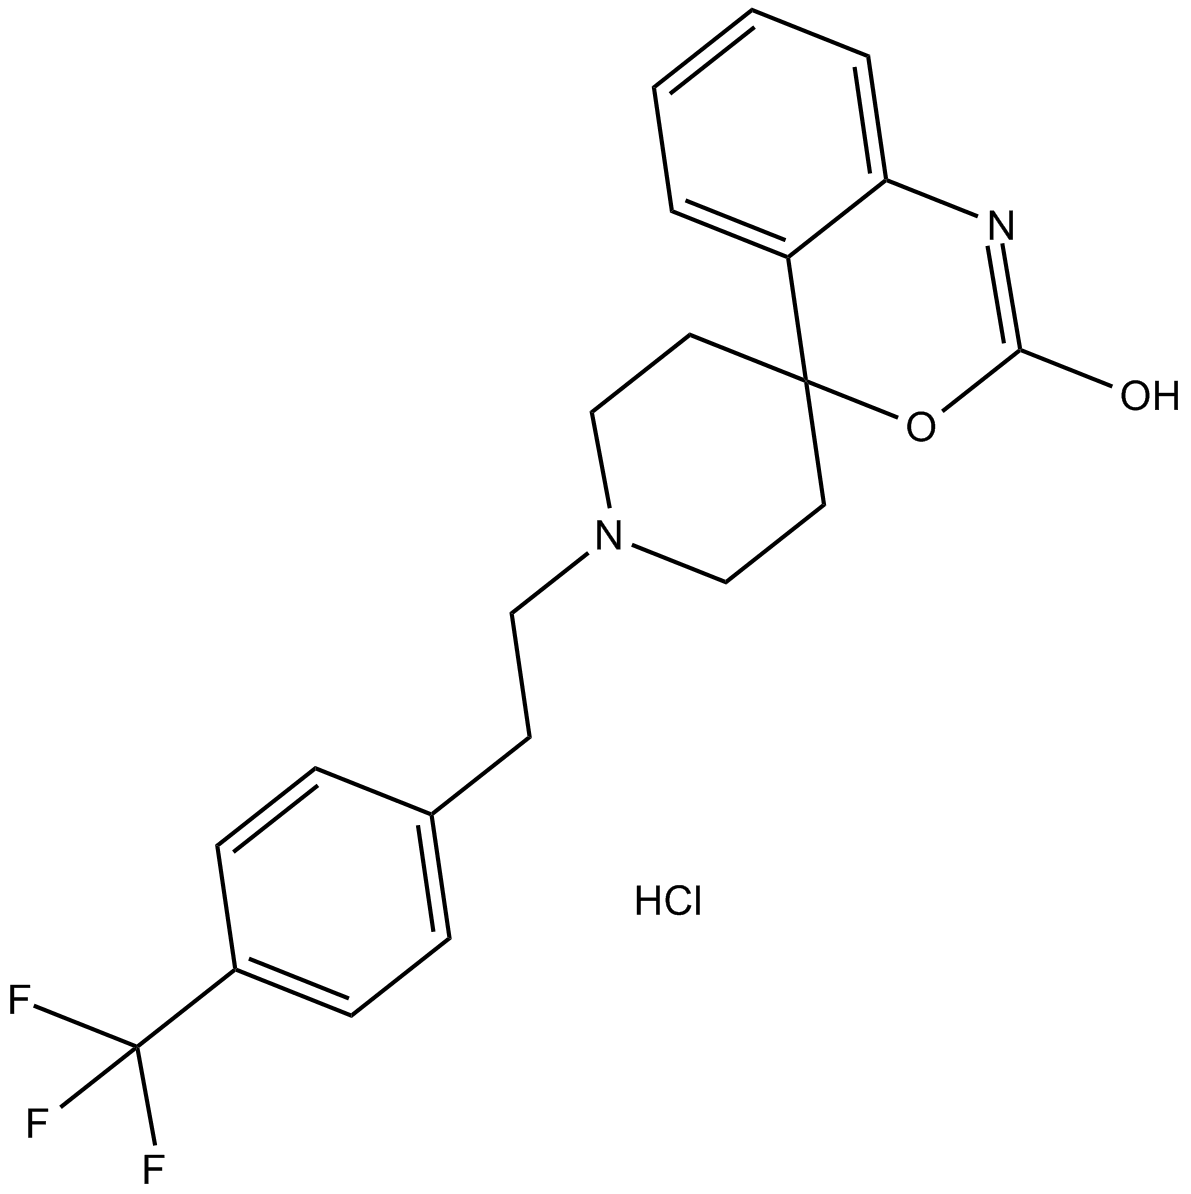 RS 102895 hydrochloride  Chemical Structure